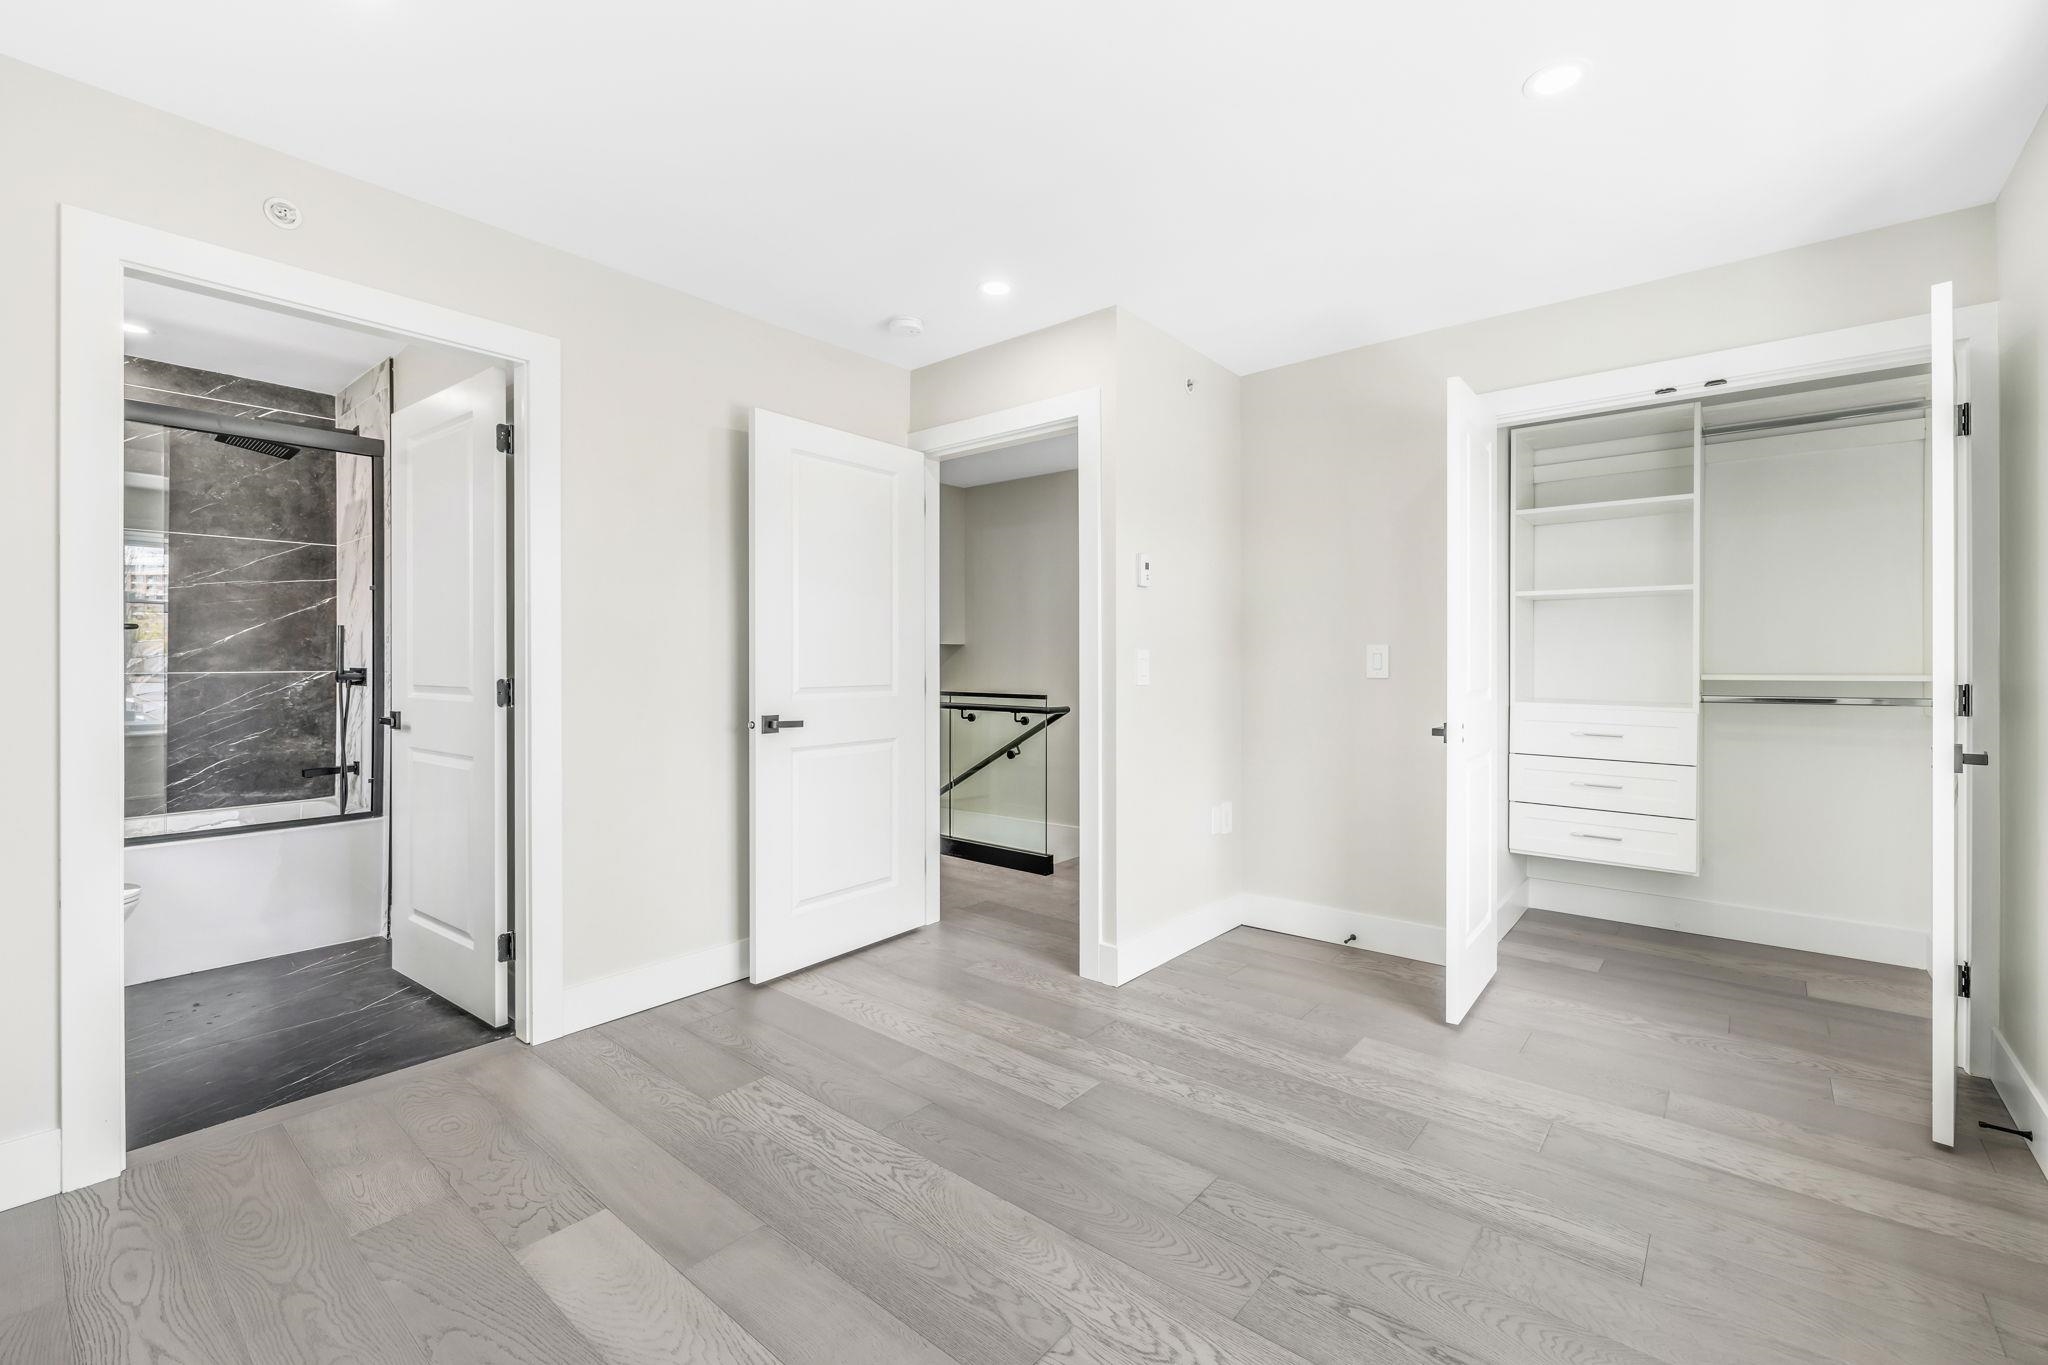 Listing image of 5061 CLARENDON STREET